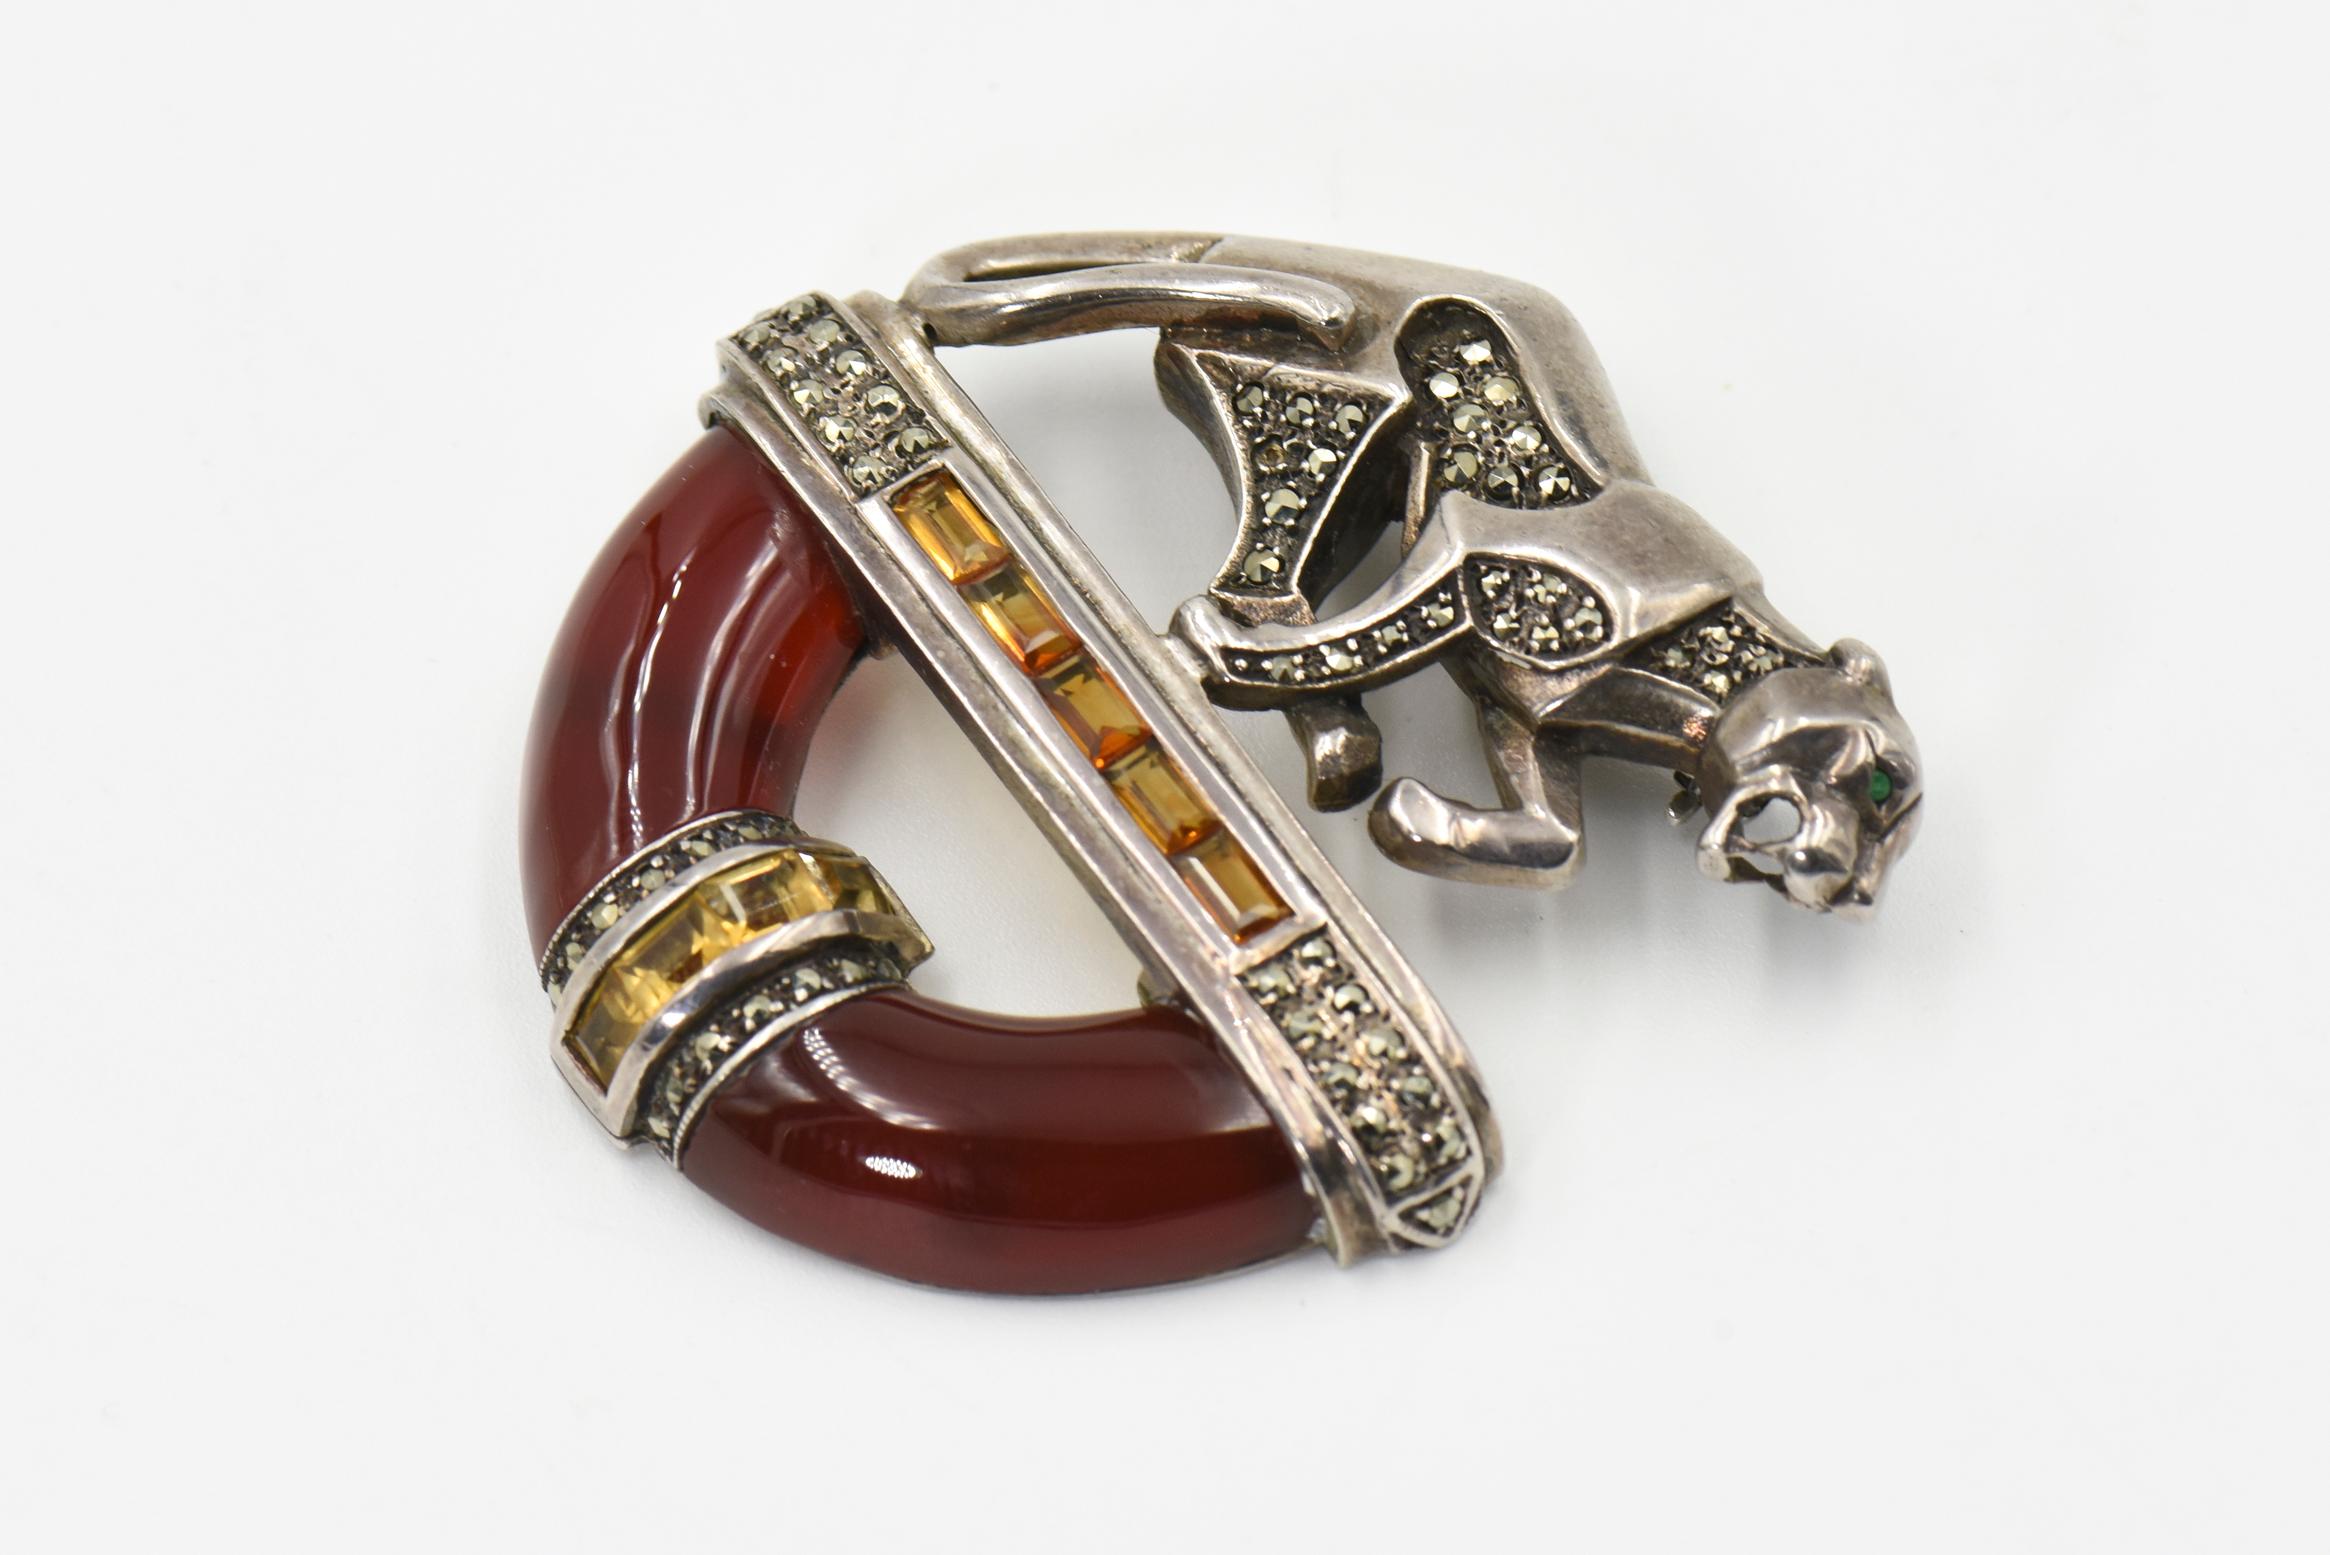 This beautiful panther brooch was inspired by the jewelry worn by the late Duchess of Windsor.  The brooch is sterling silver set with citrine, marcasite, carnelian and finished with an emerald eye.  